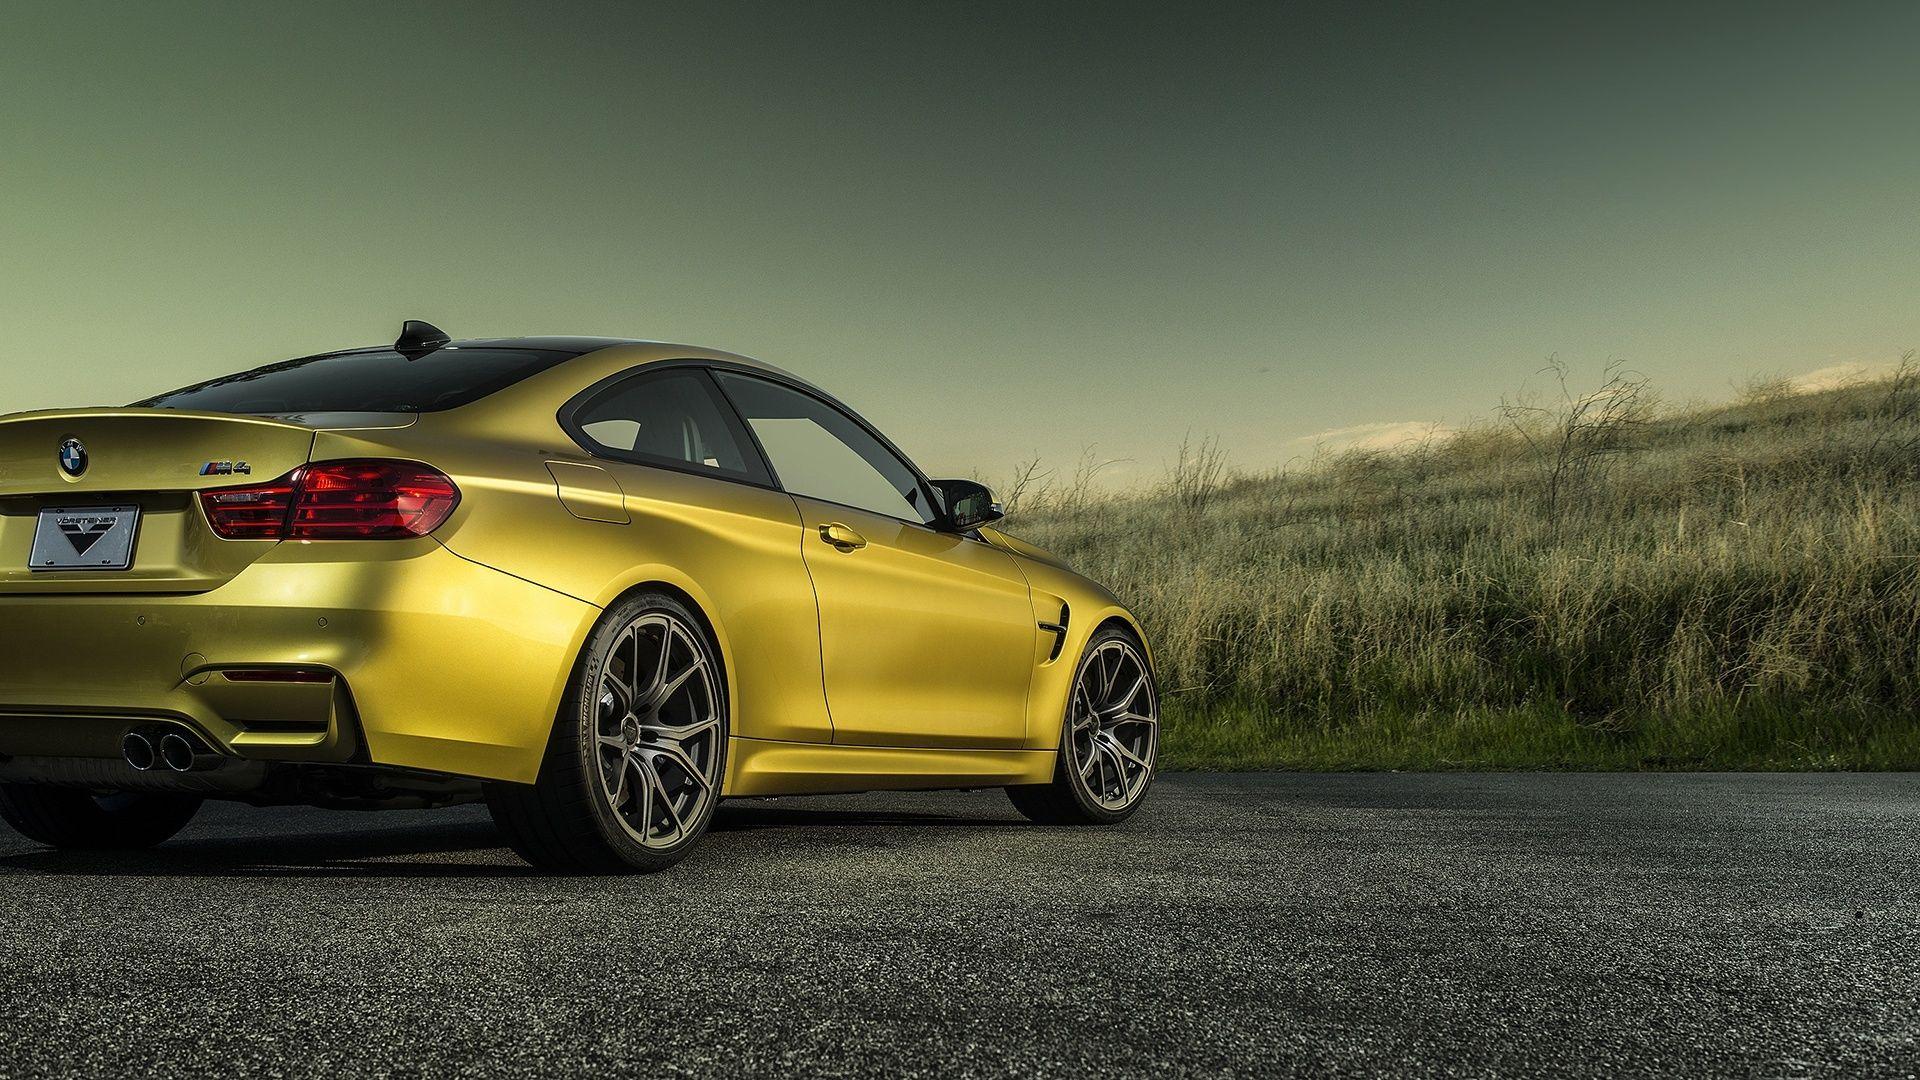 BMW ///M image BMW M4 F82 (Golden) HD wallpaper and background